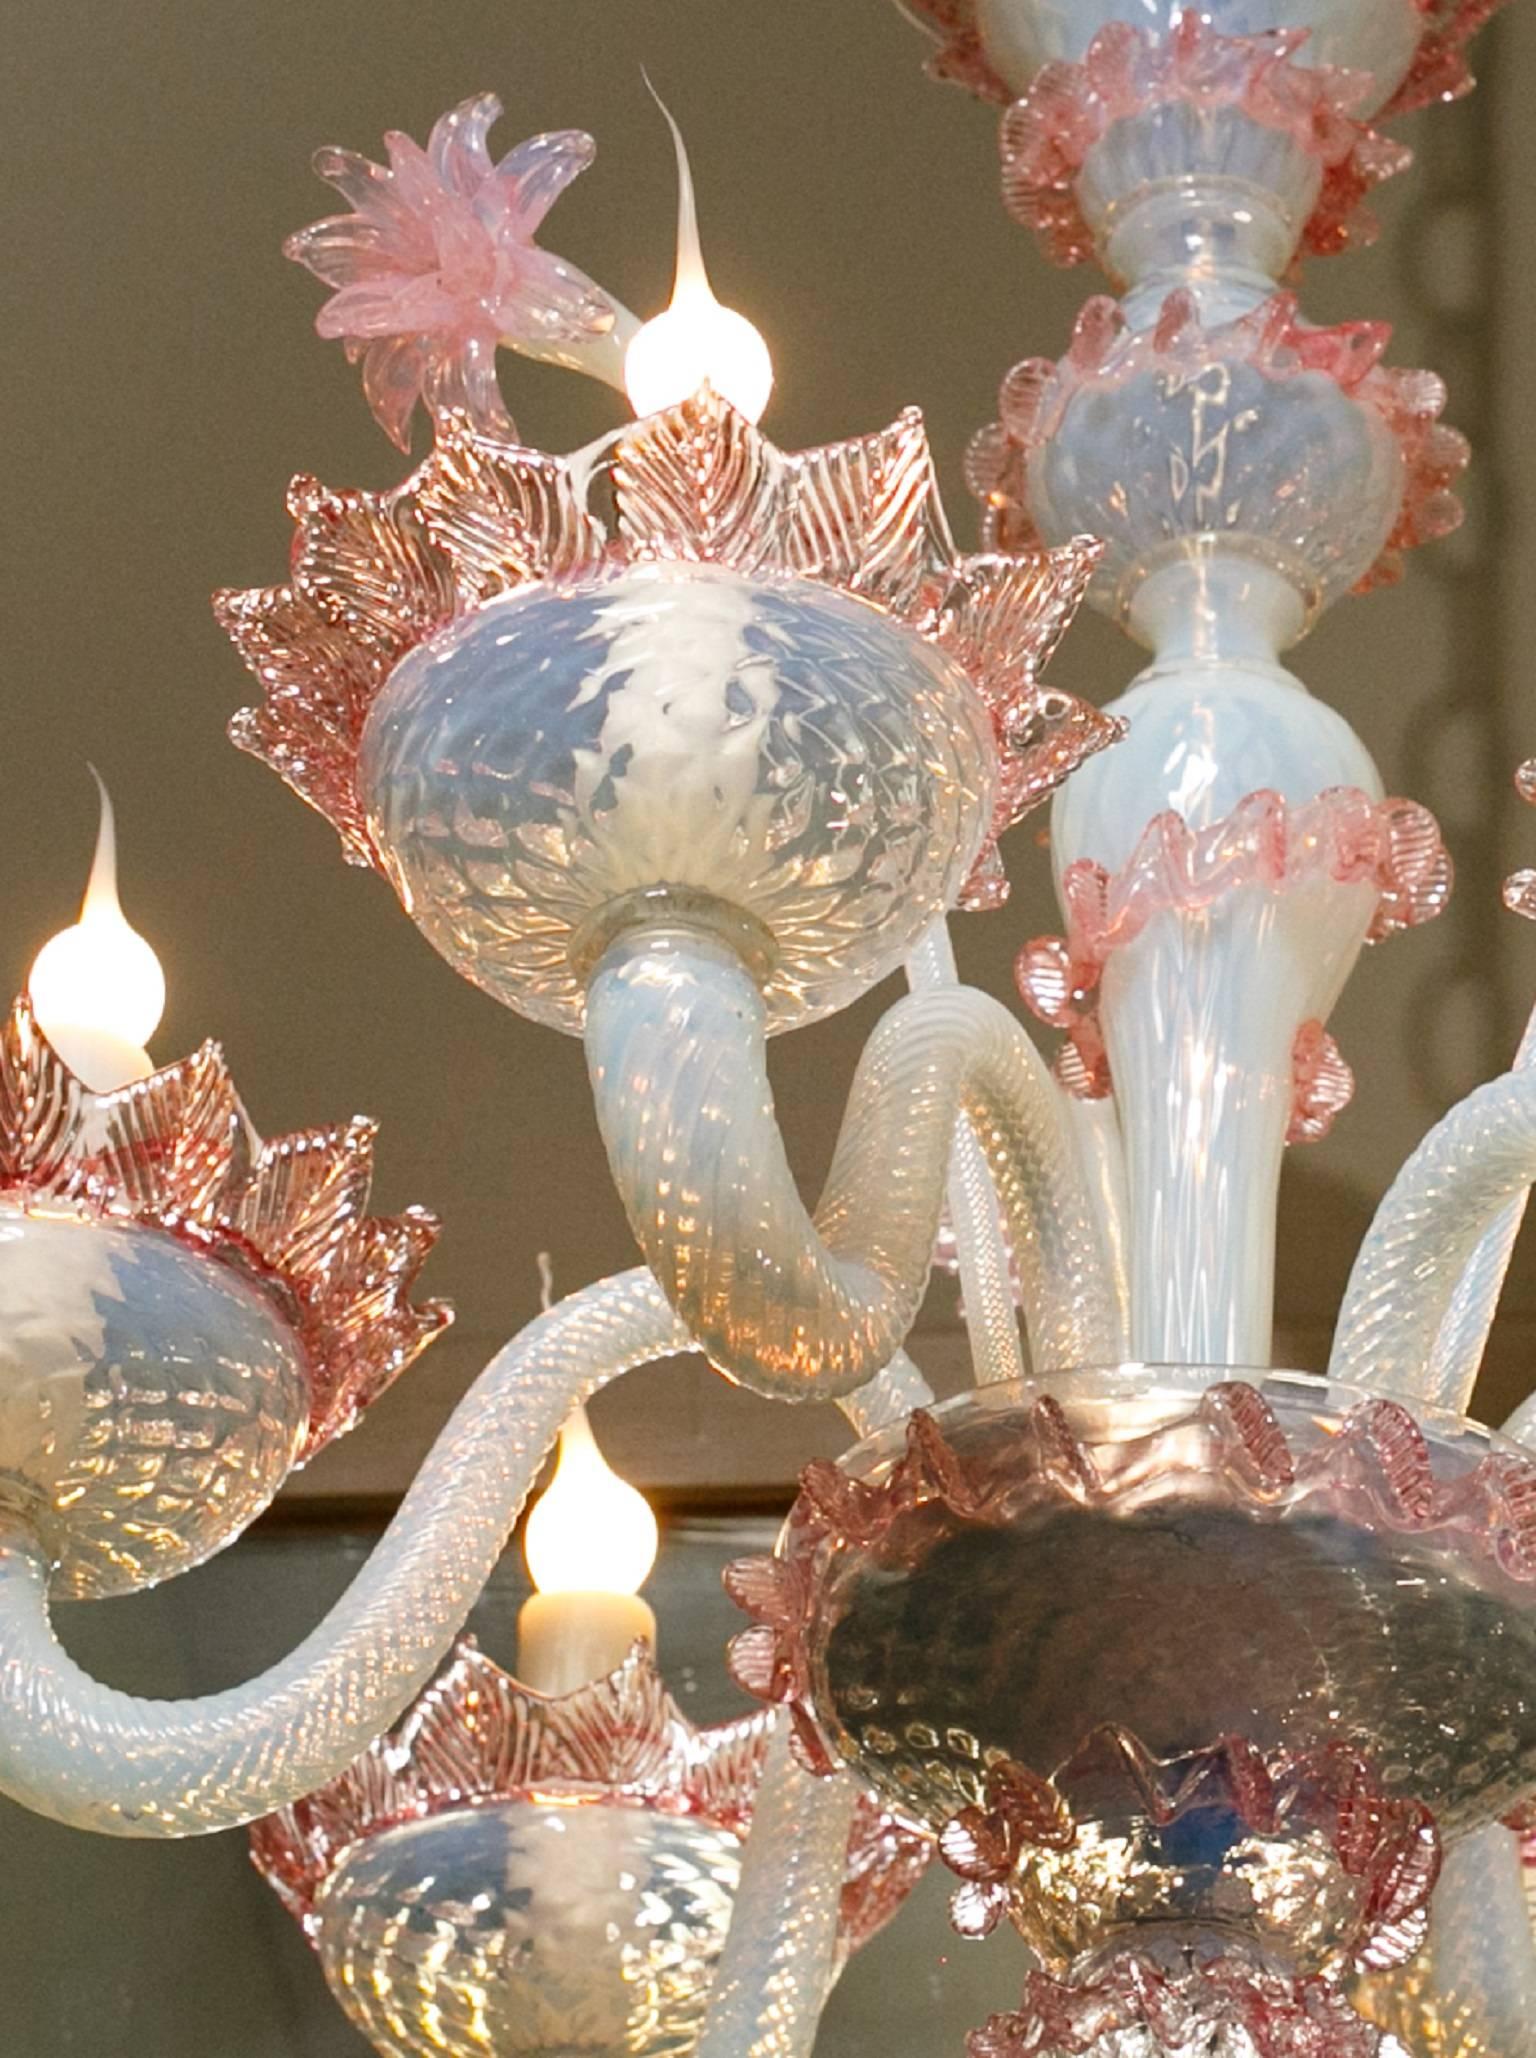 Handblown Classic pink and white Murano glass chandelier from Italy, circa 1940. Newly rewired with UL listed parts and six candelabra sockets. Features three handblown pink glass flowers on stems. Comes with silver colored chain and canopy.